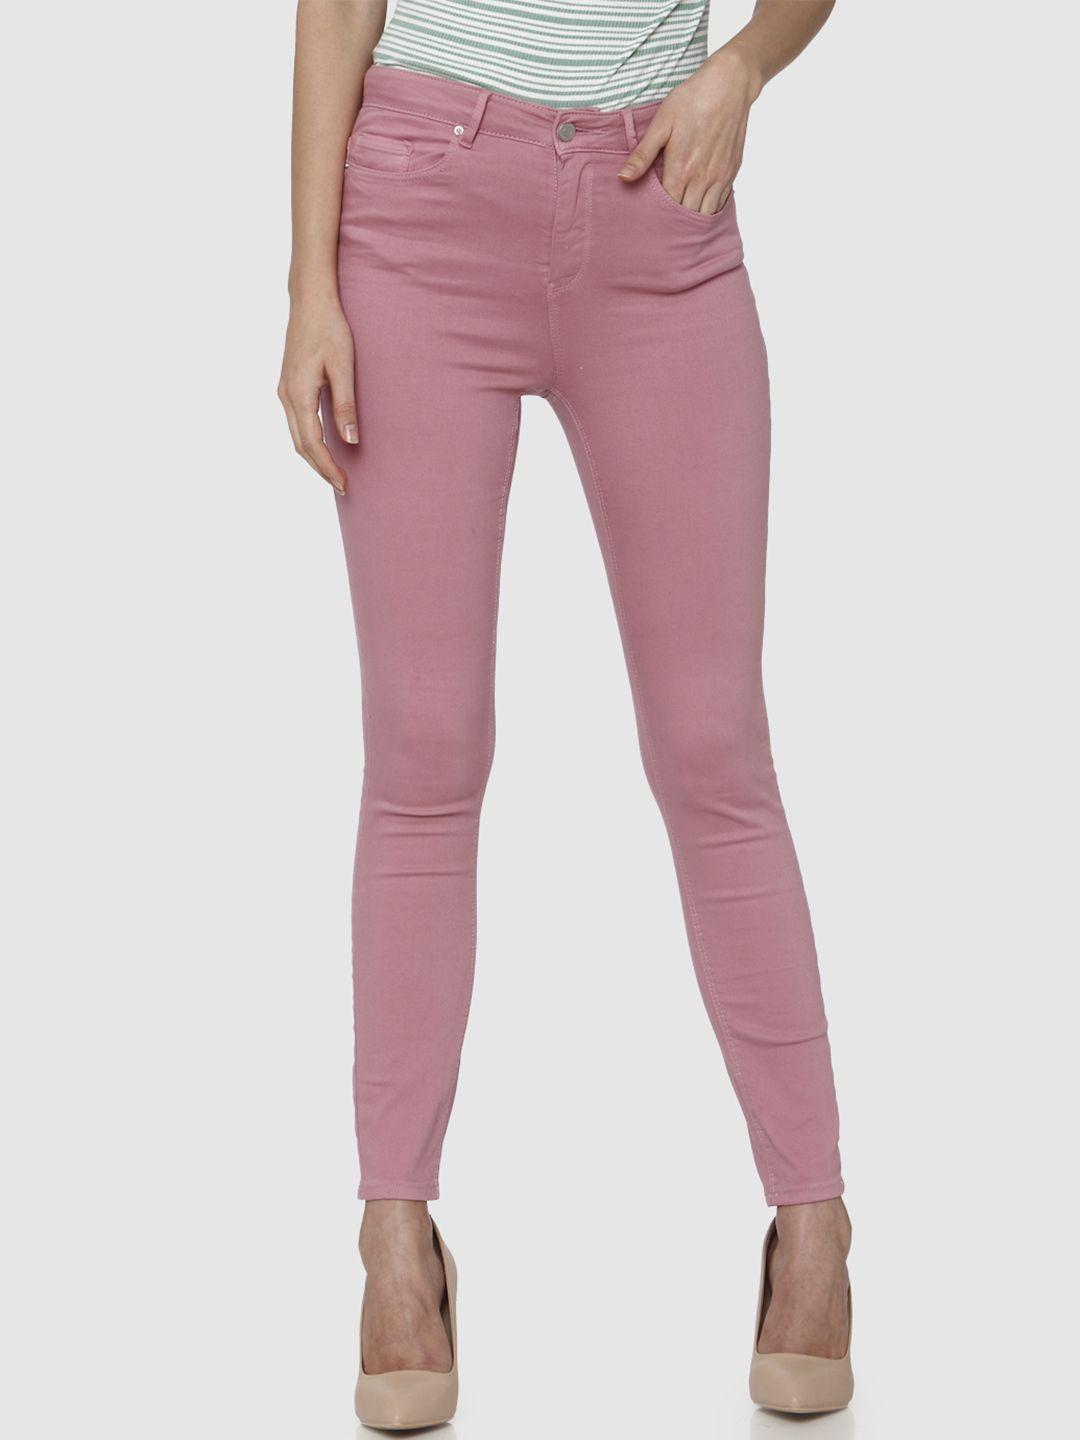 vero moda women pink skinny fit high-rise clean look stretchable jeans